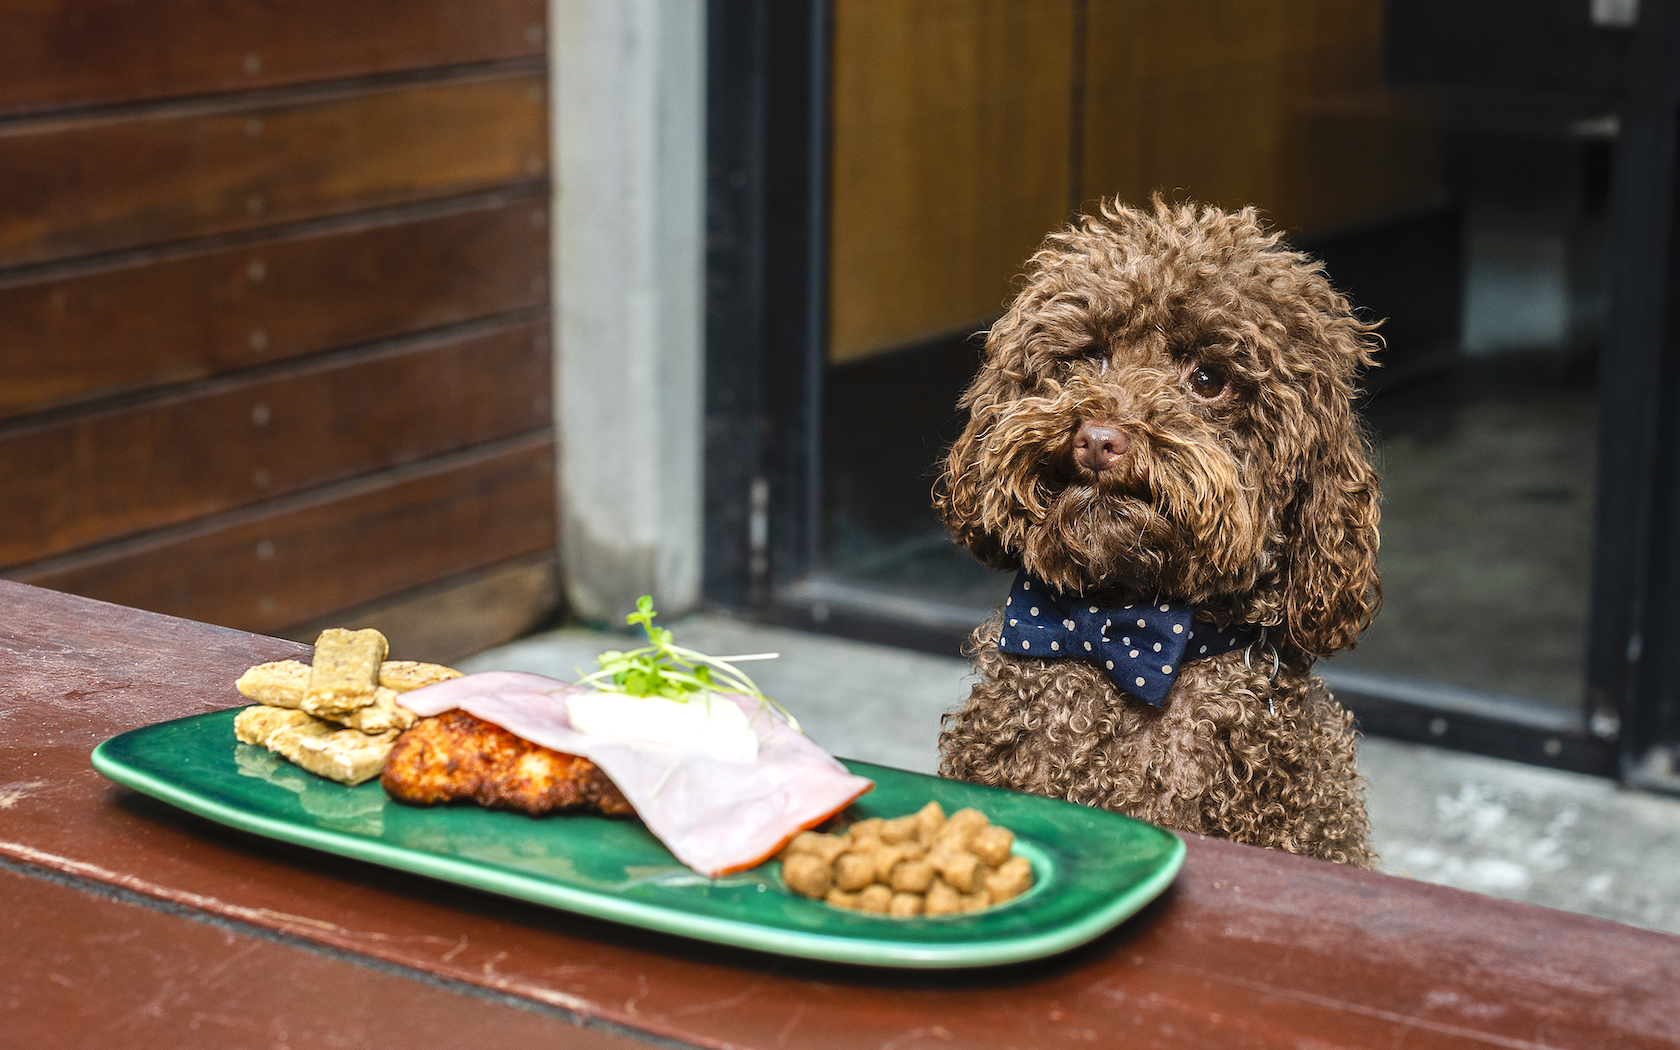 Newmarket Hotel In Melbourne Is Serving A $5 Puppy Parma For Dogs